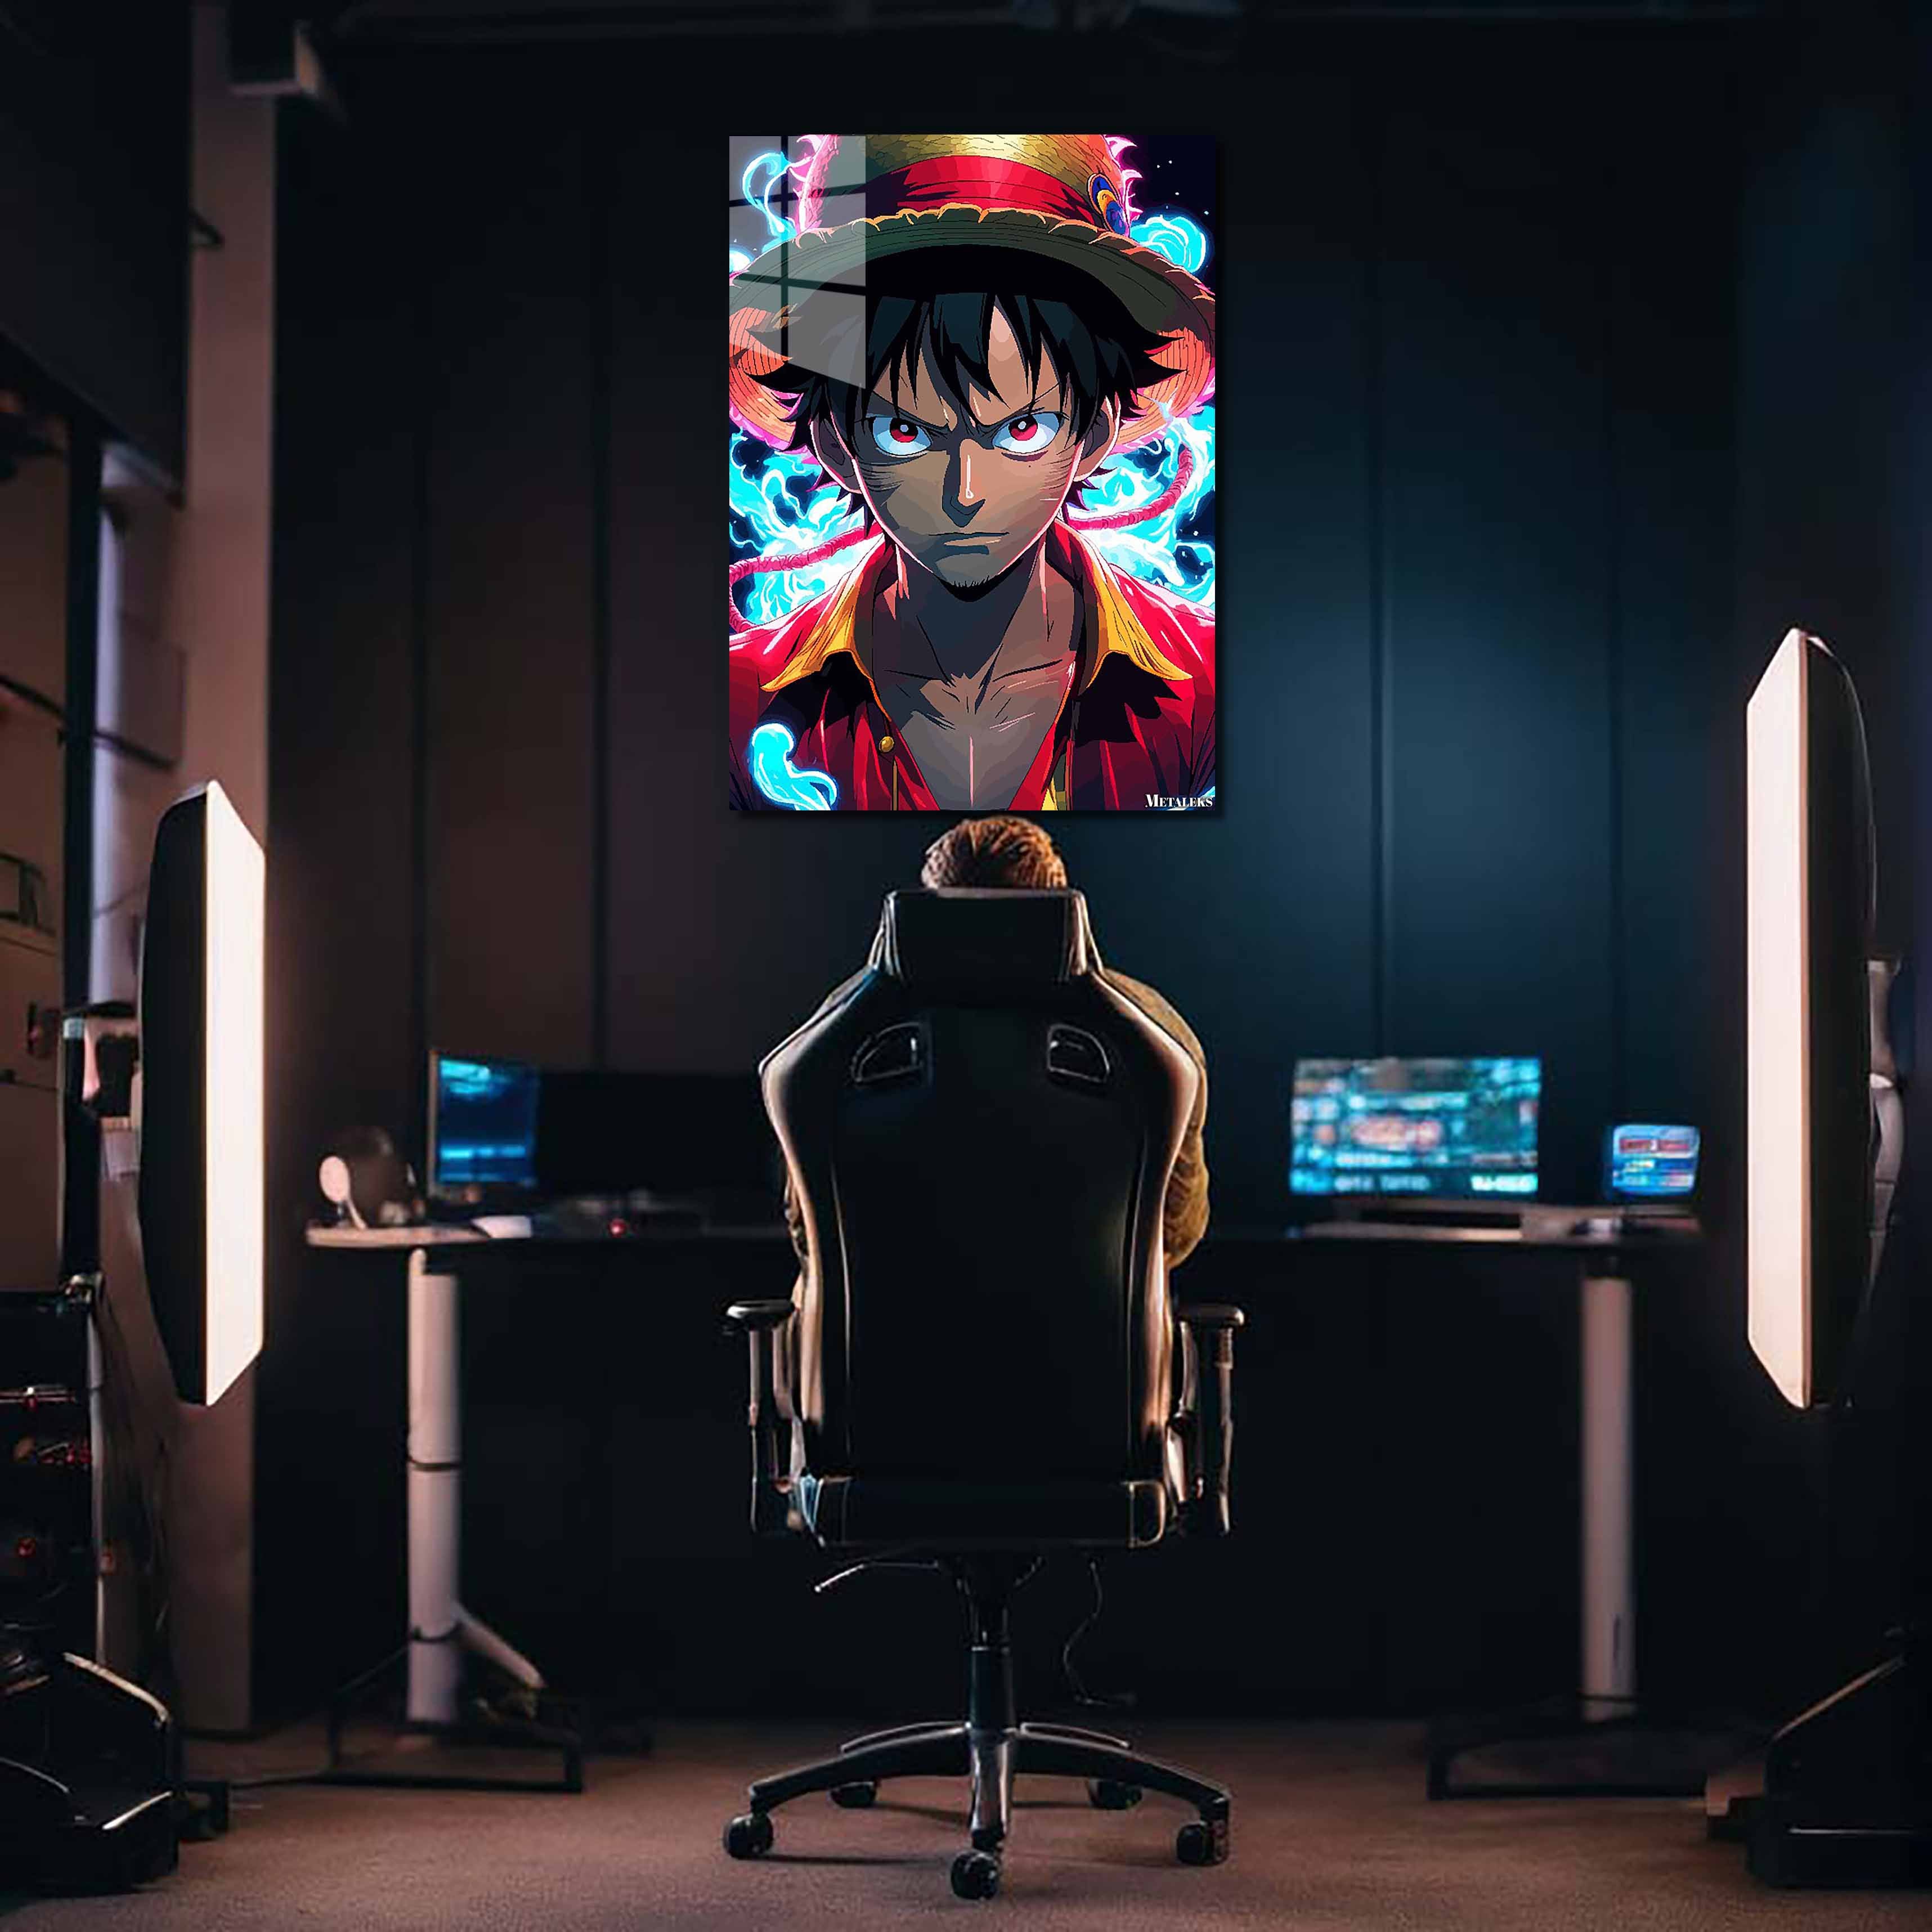 Luffy poster neon-designed by @Sheshh